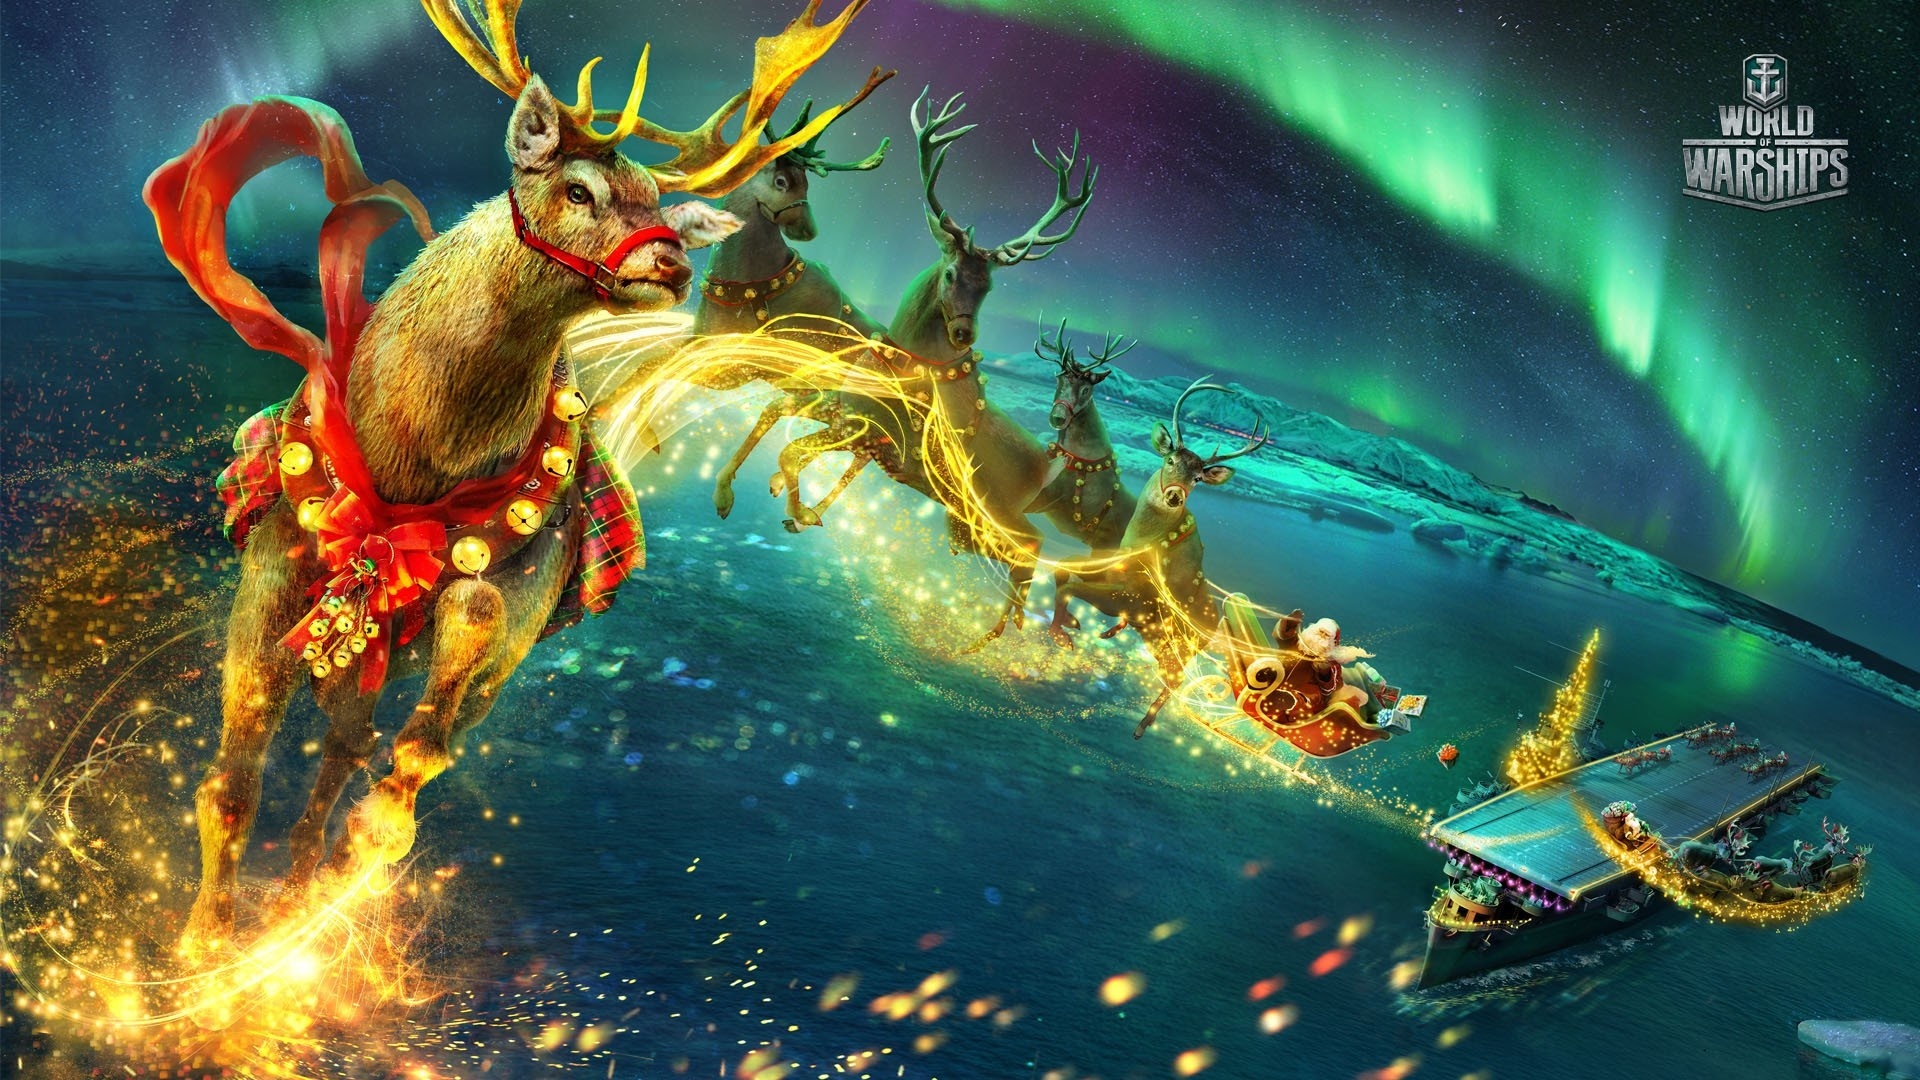 100% Quality Hd Creative Reindeer Pictures, 1920x1080, - HD Wallpaper 